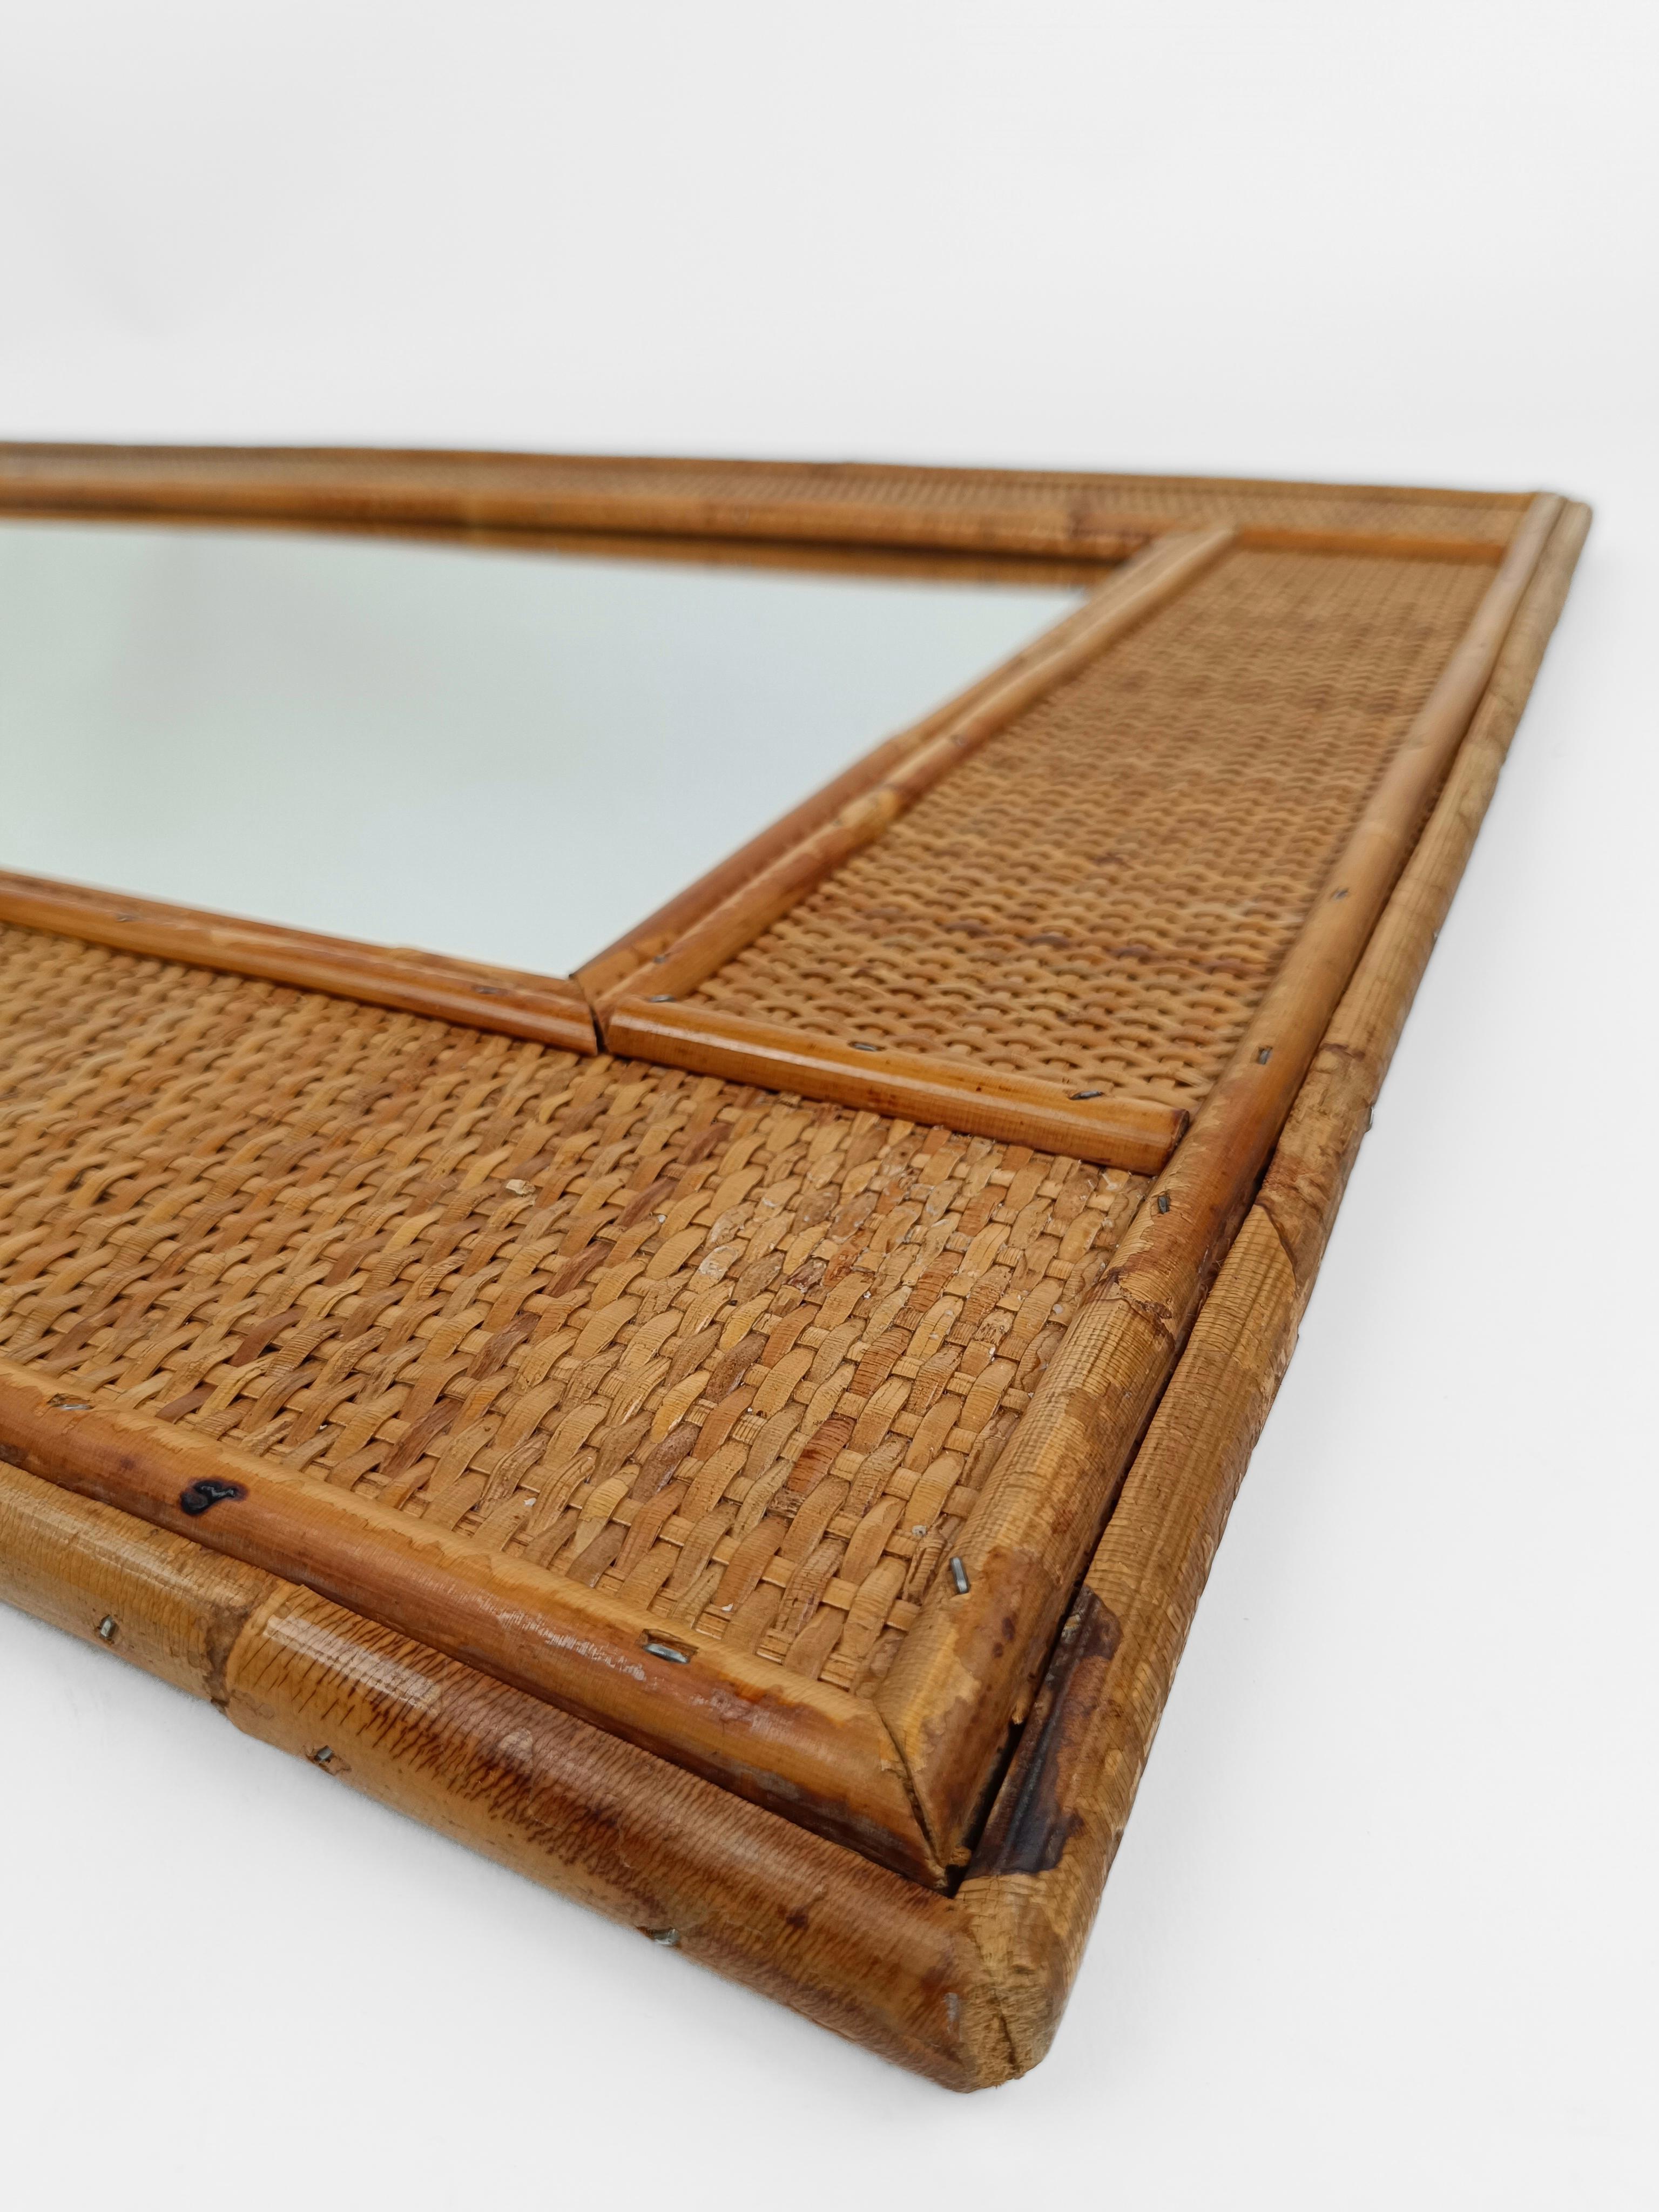 Rectangular mirror made in Italy  between the 60s and 70s.
The mirror frame is covered with a dense weave of woven straw divided into sections by thin perpendicular rushes and the color given to it by the patina of time makes it splendid.
It is a